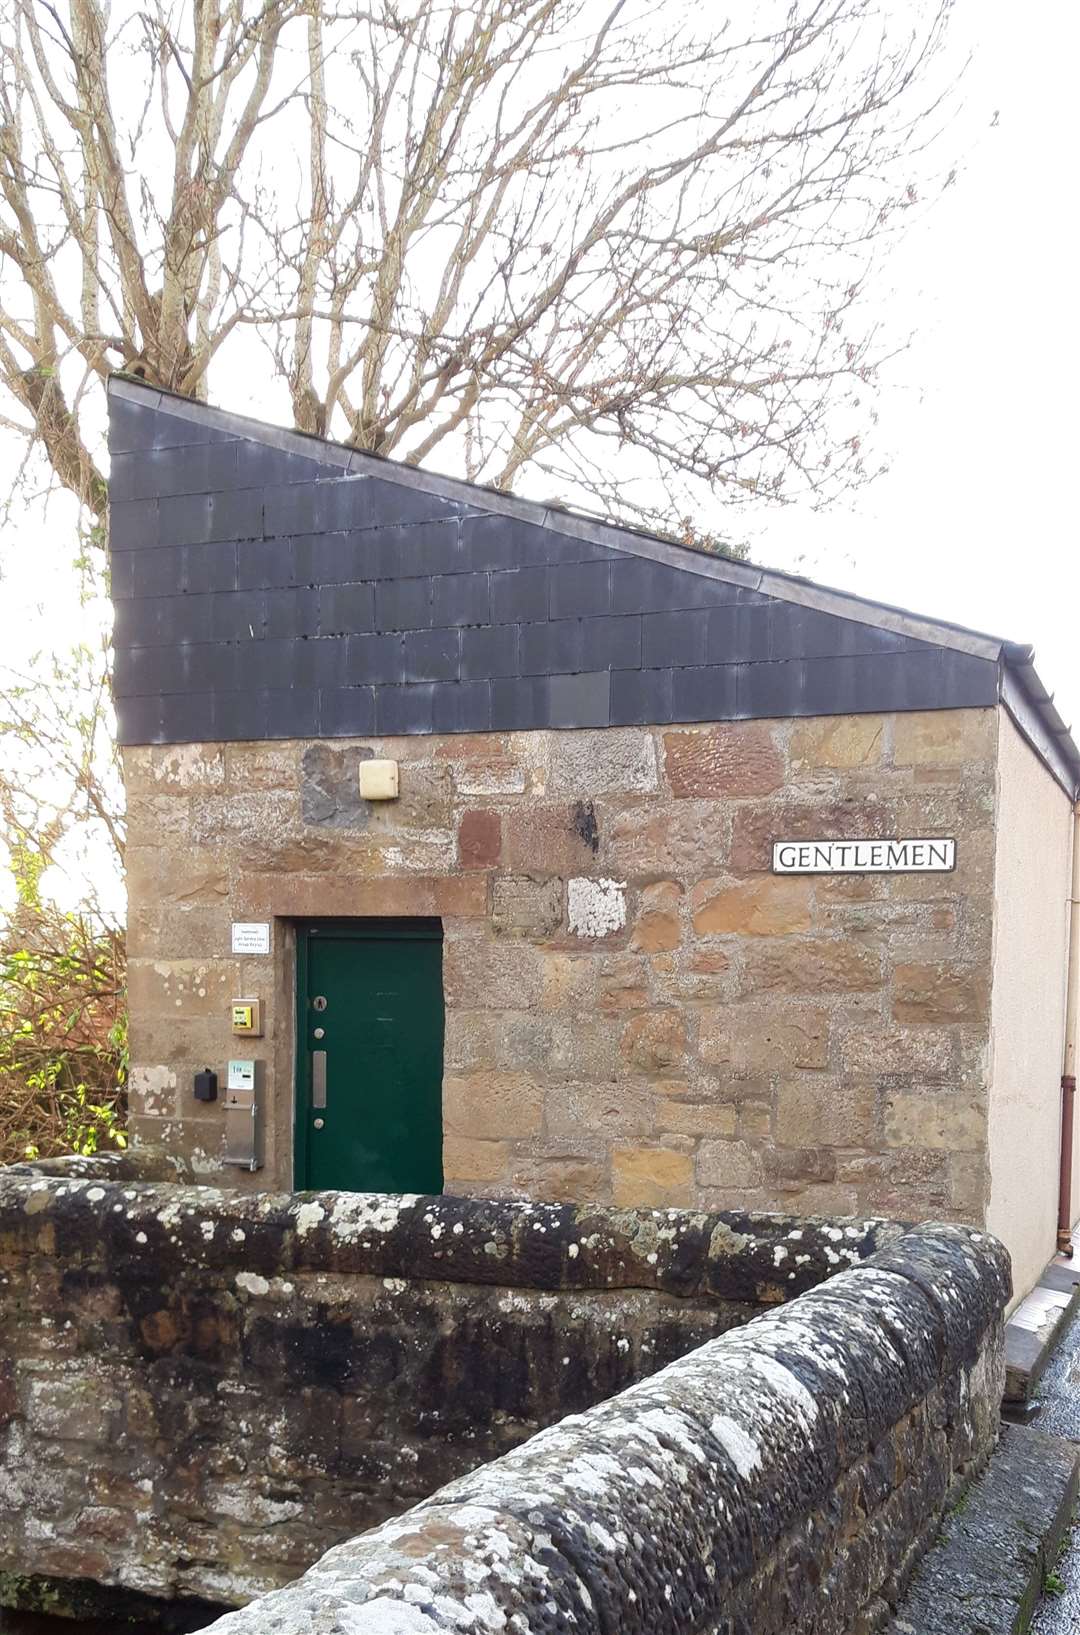 Dornoch public toilets are no nearer renovation despite a project being launched more than a year ago.